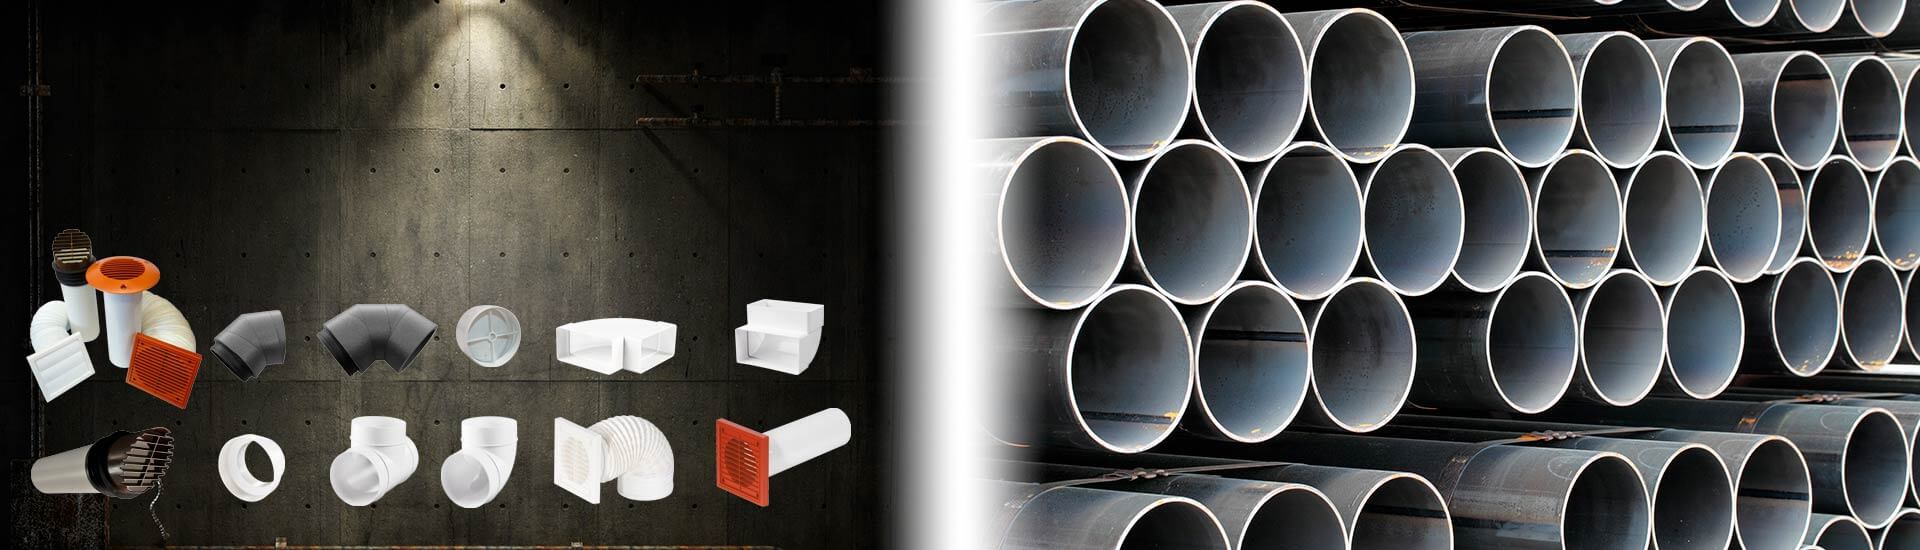 ducting-accessories